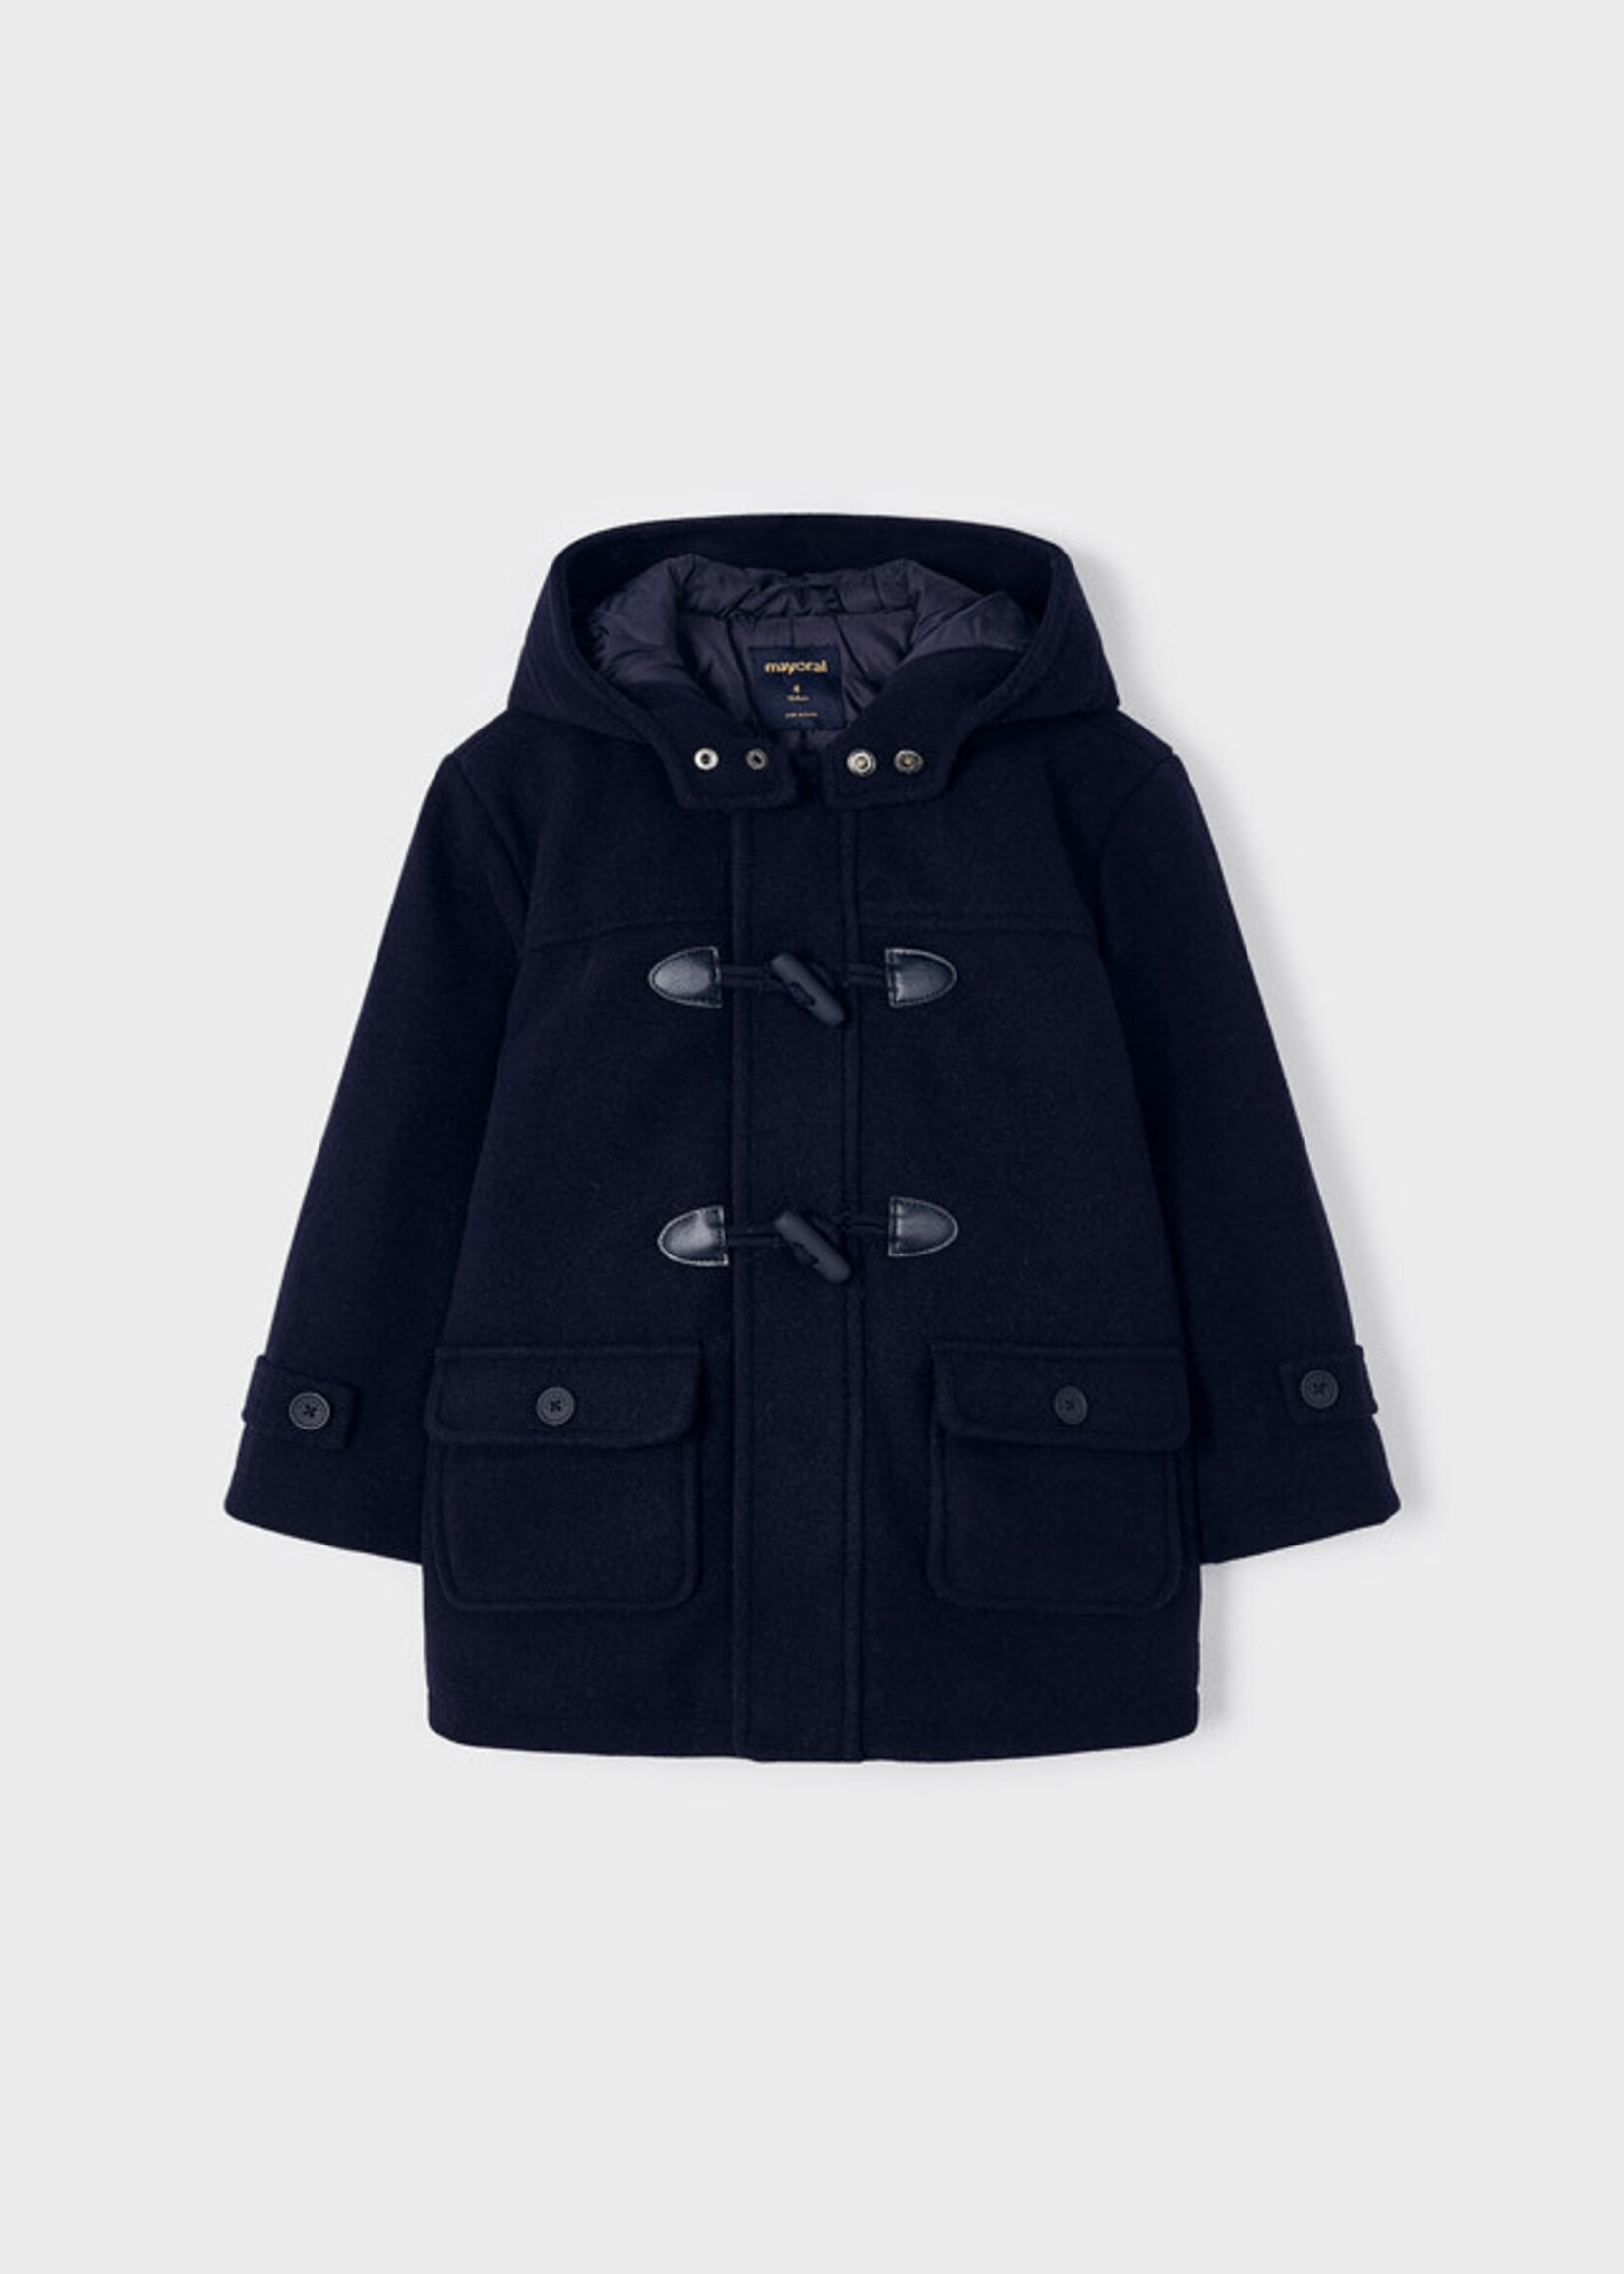 Mayoral Mayoral Trench Navy - 22 04469